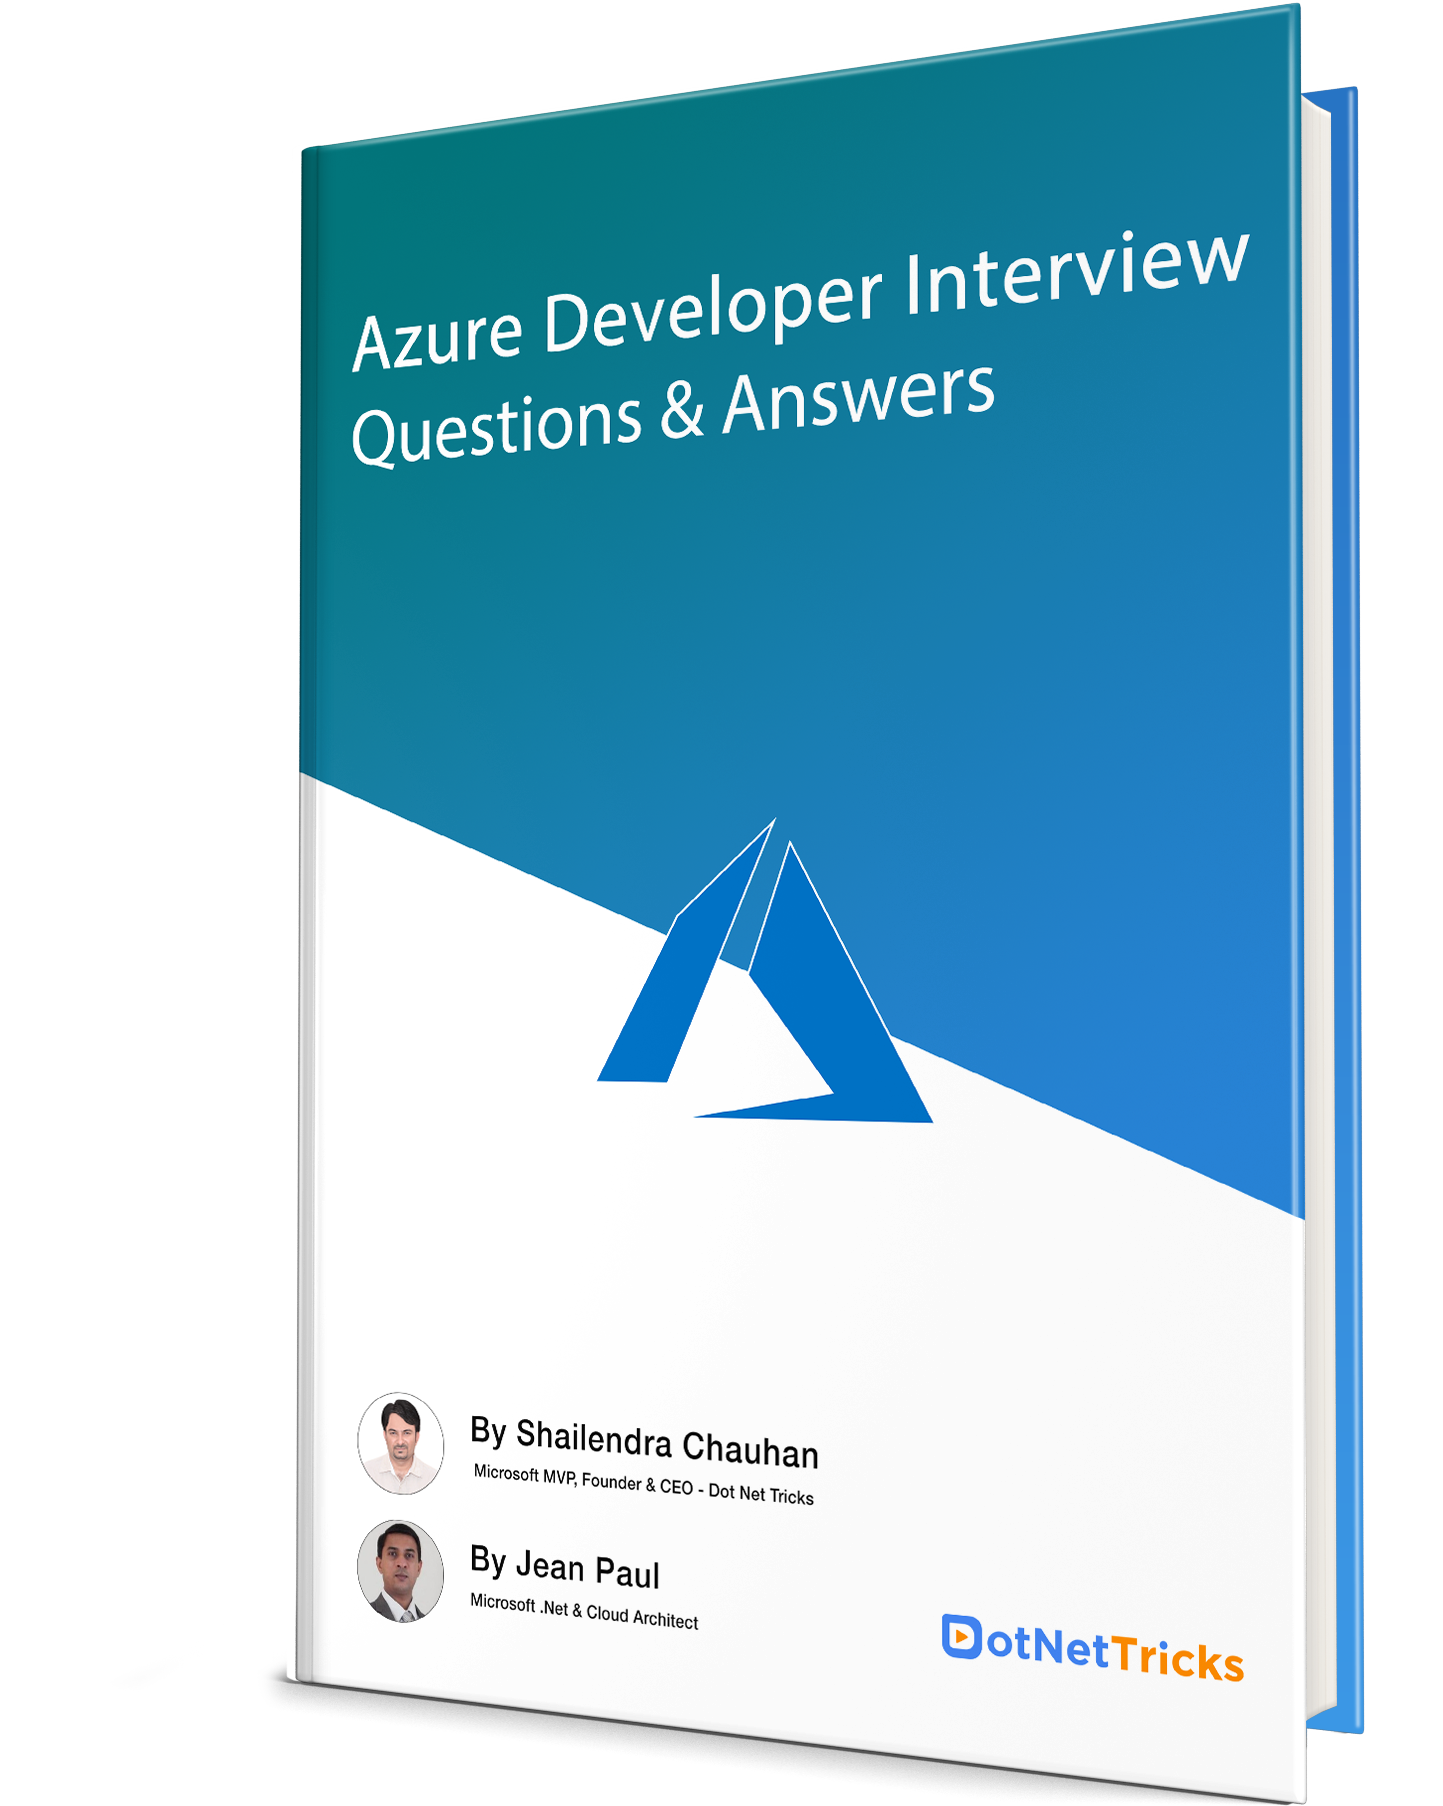 Azure Interview Questions & Answers eBook